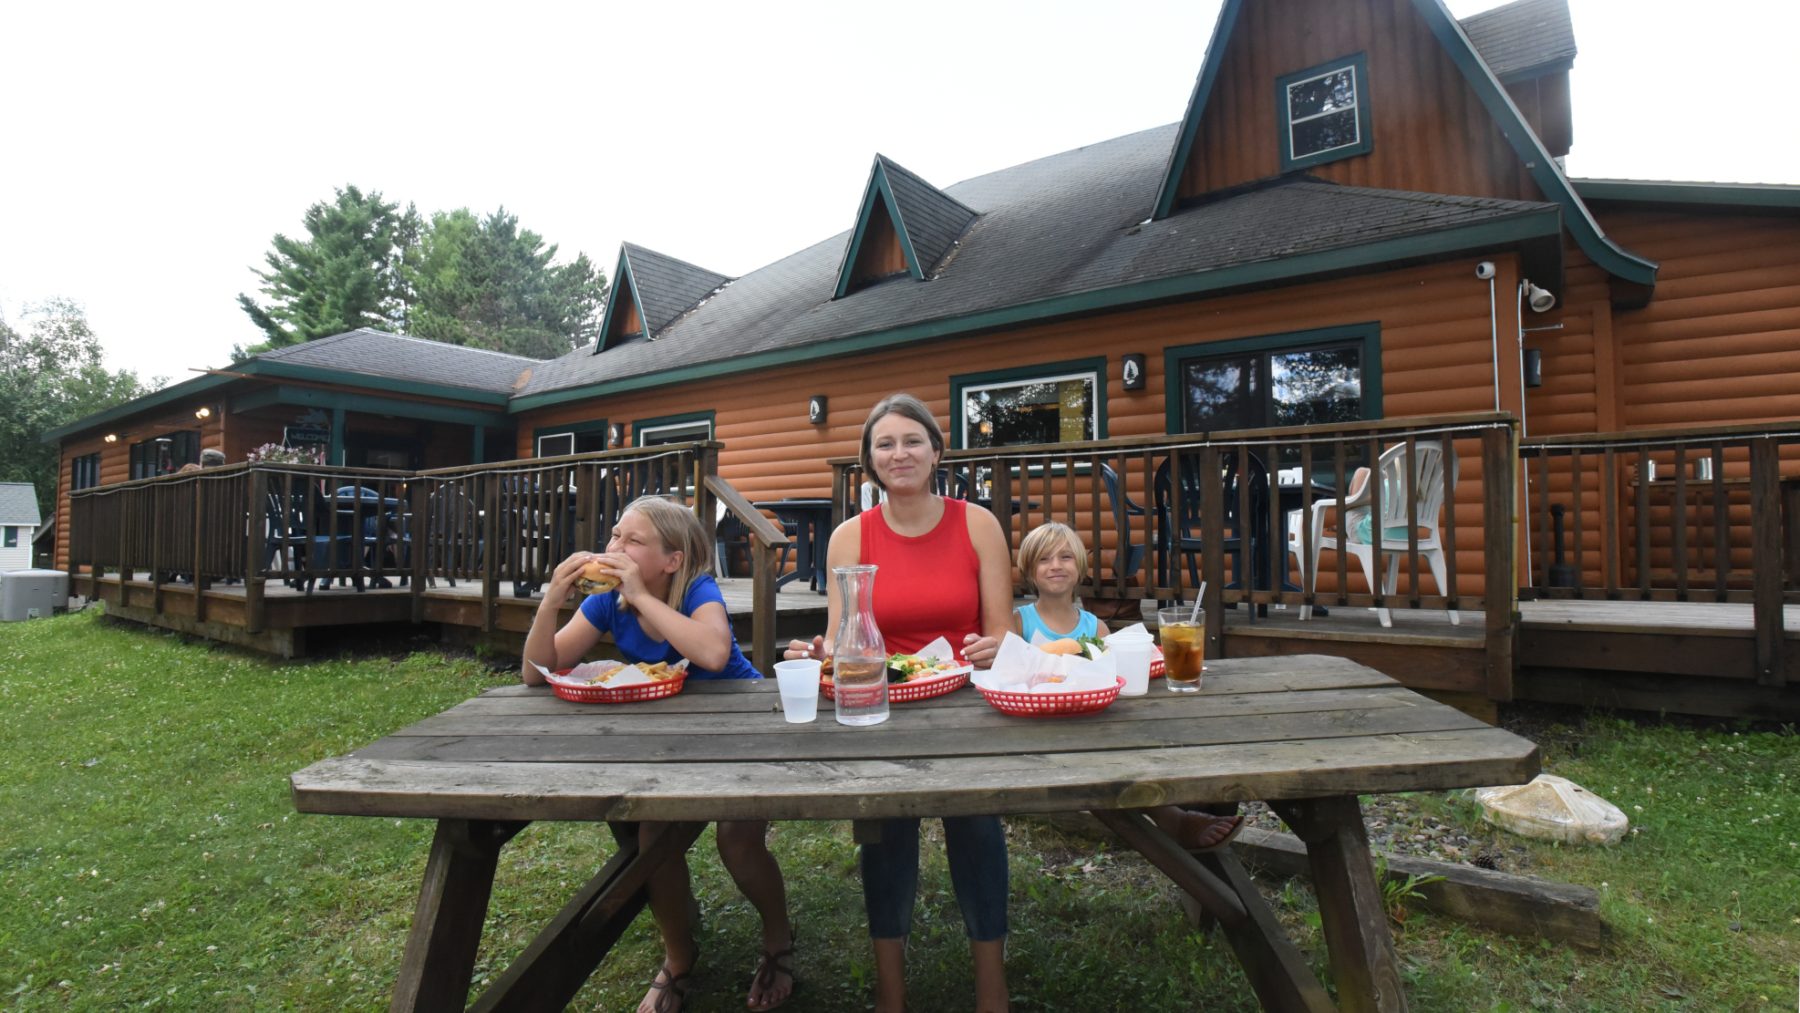 Article: Amazing spots for outdoor dining & drinks in Wisconsin | Family eating outdoors at Headwaters Restaurant Boulder Junction WI